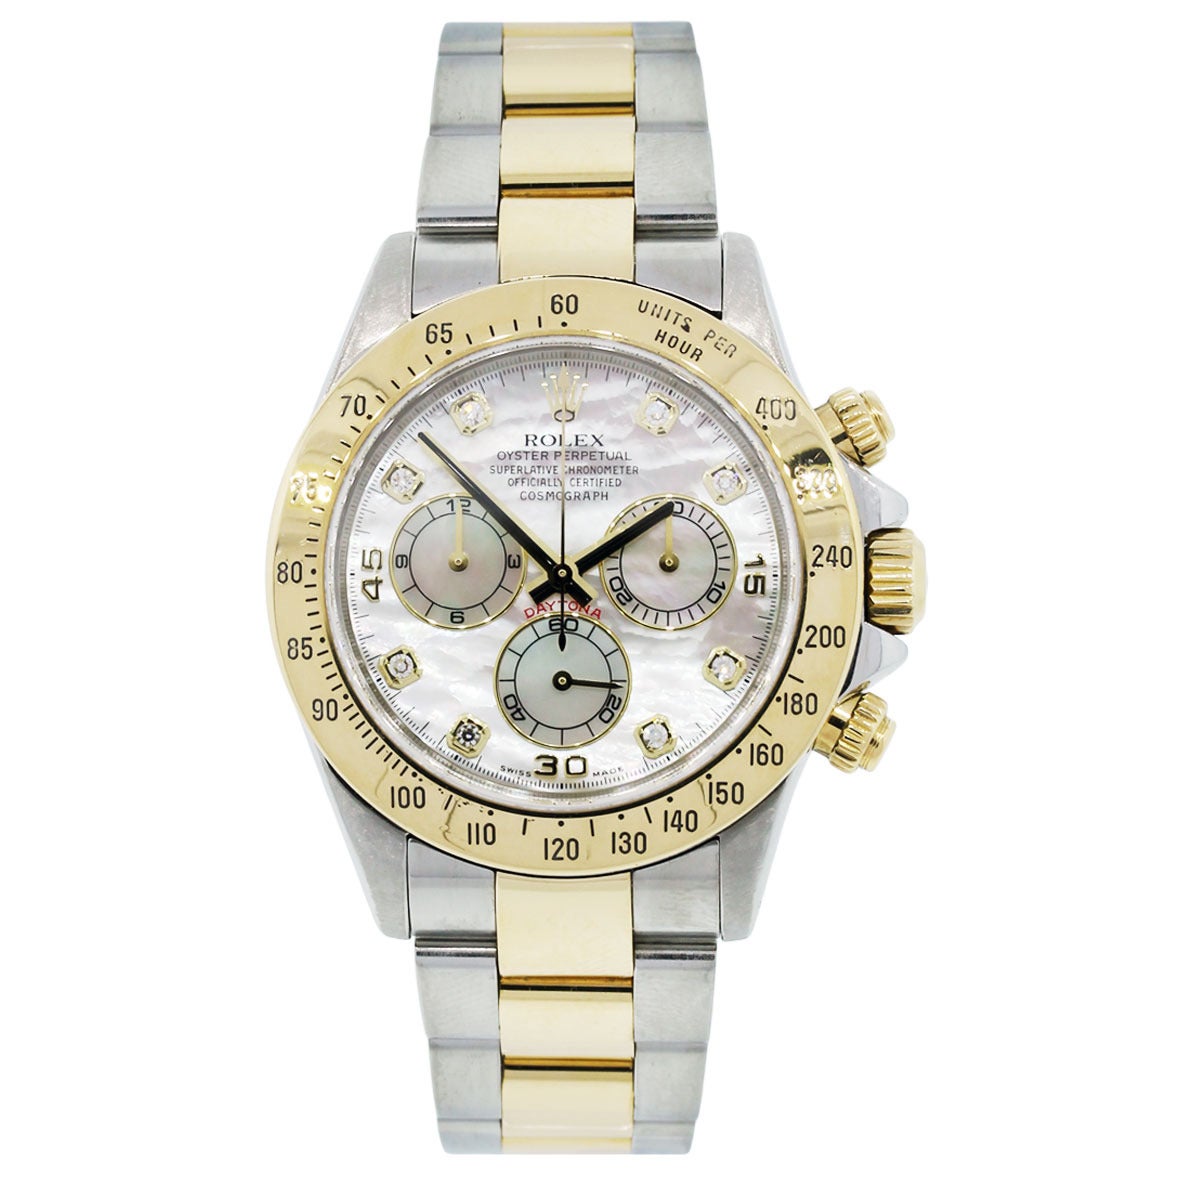 Company: Rolex
Model: Daytona
Model #: 116523
Case Material: Stainless Steel
Case Diameter: 40 mm
Bezel: 18k Yellow Gold Fixed
Bracelet: Stainless Steel and 18k Yellow Gold Oyster with Deployment Clasp
Dial 	Mother of Pearl with Diamond Dial